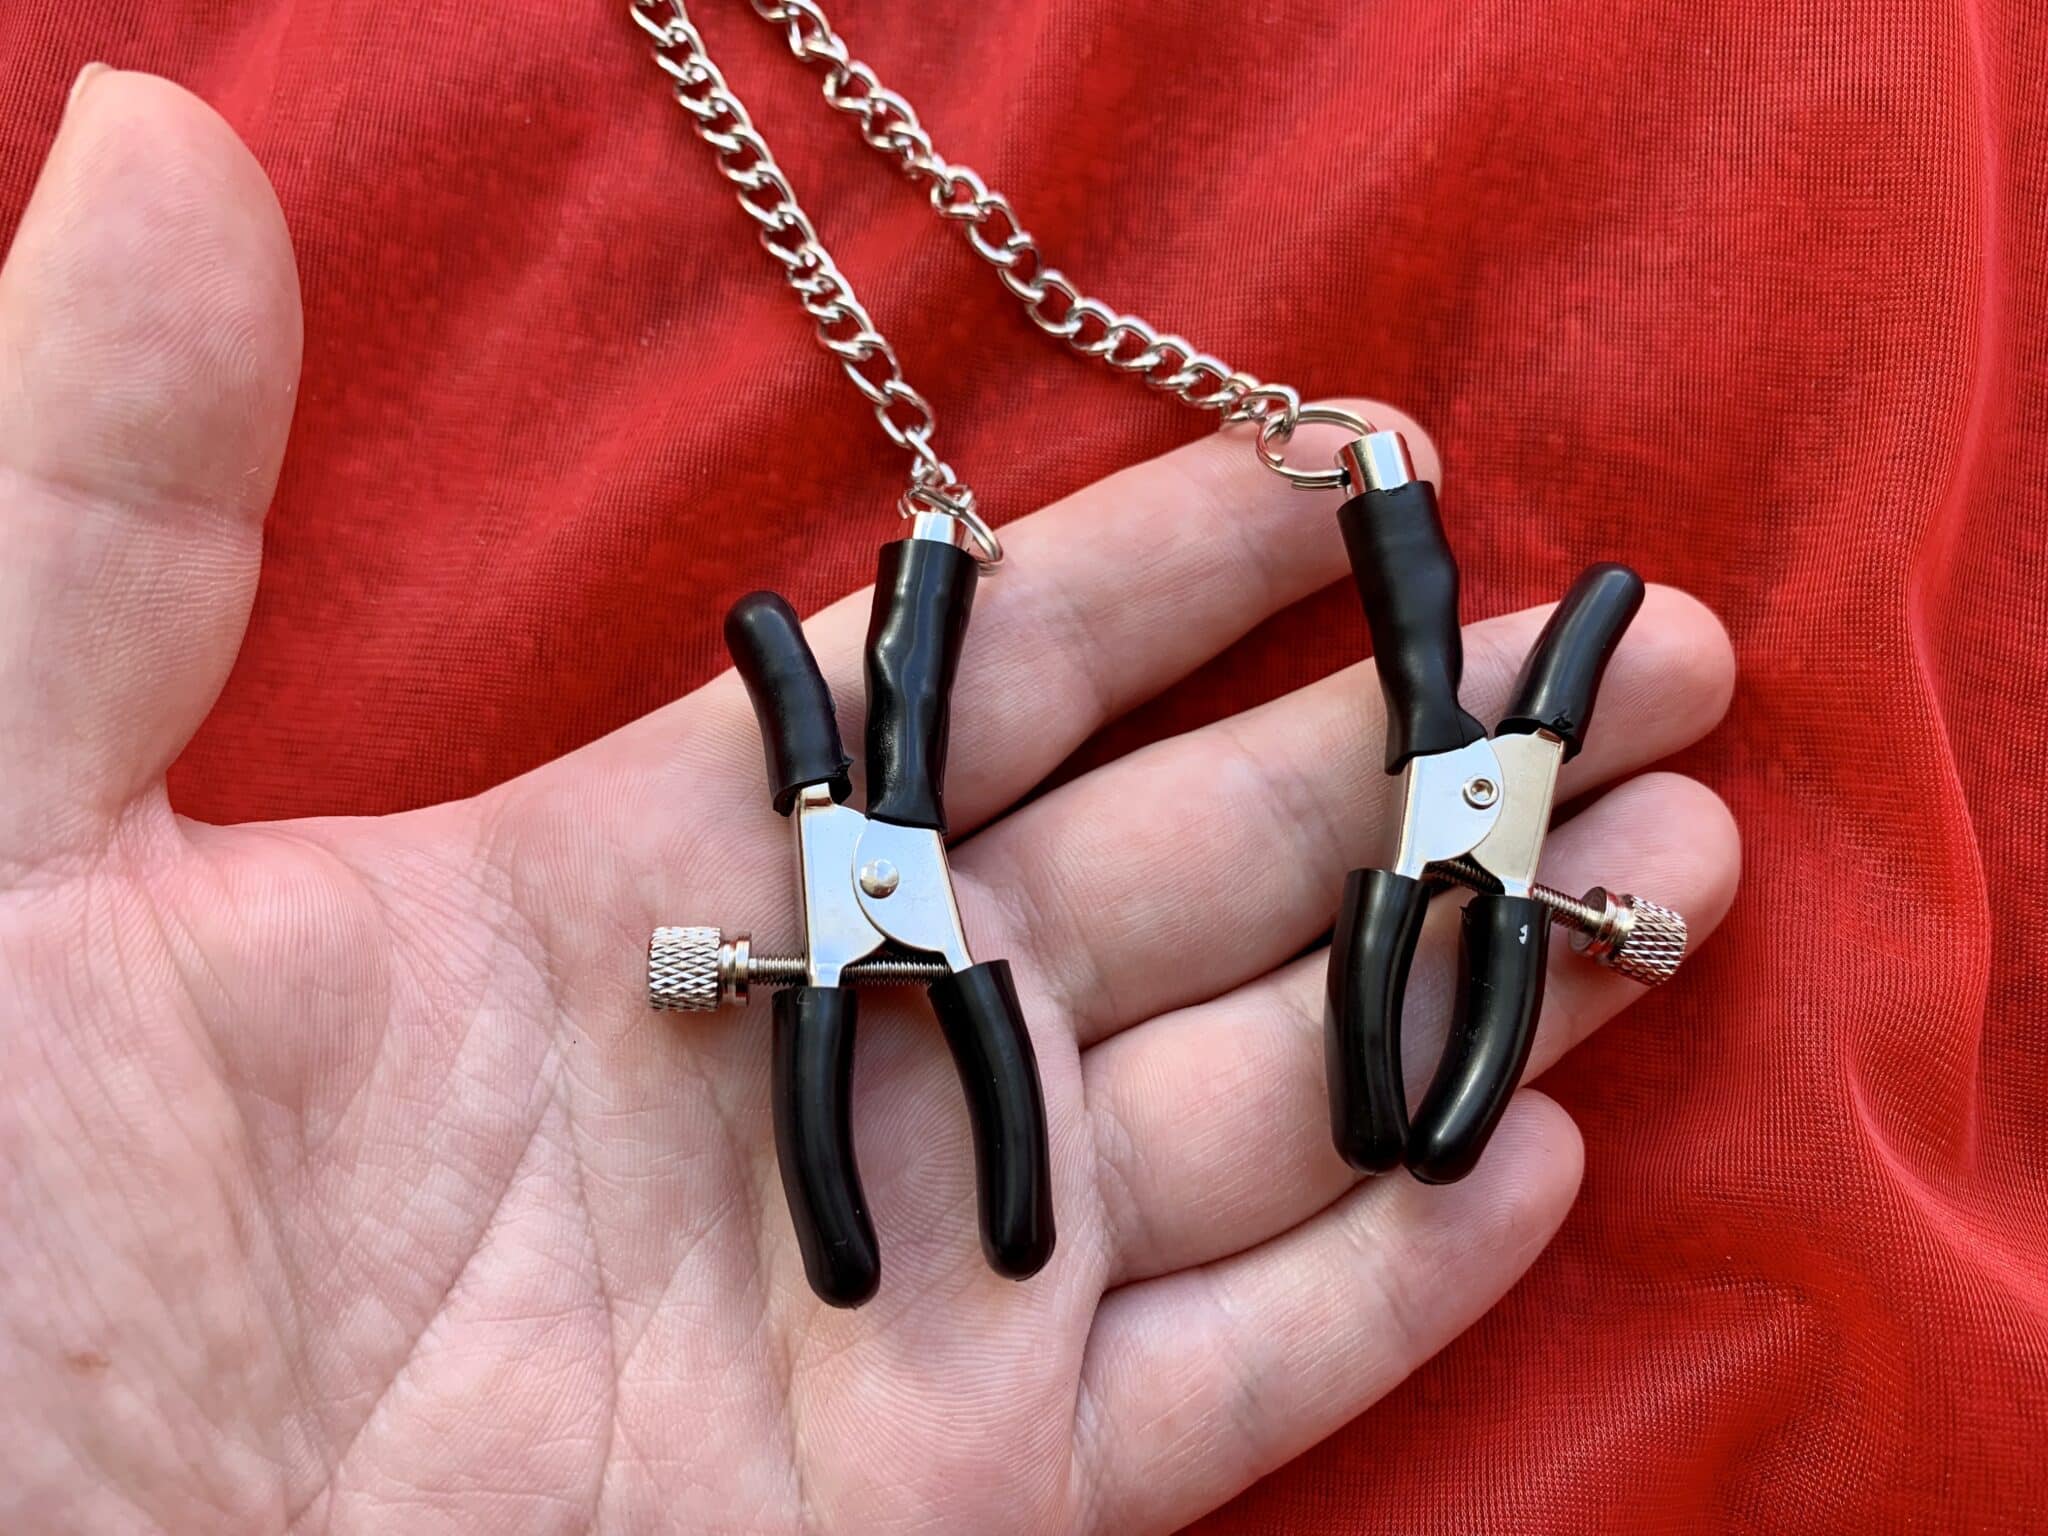 My Personal Experiences with Fetish Fantasy Alligator Nipple Clamps